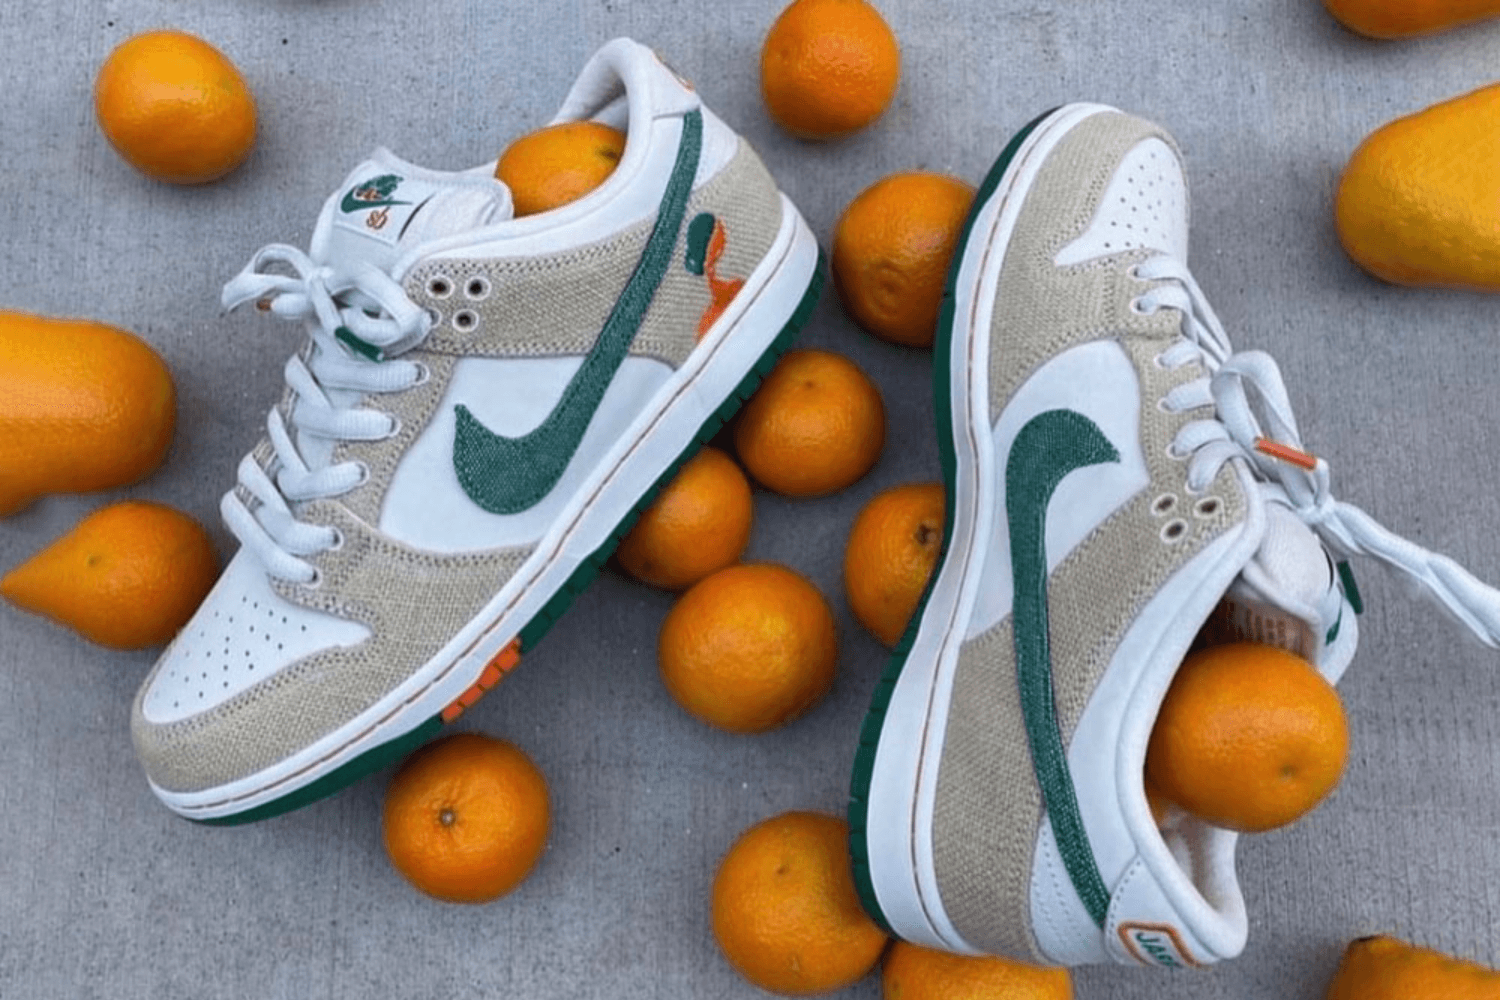 A first look at the Jarritos x Nike SB Dunk Low